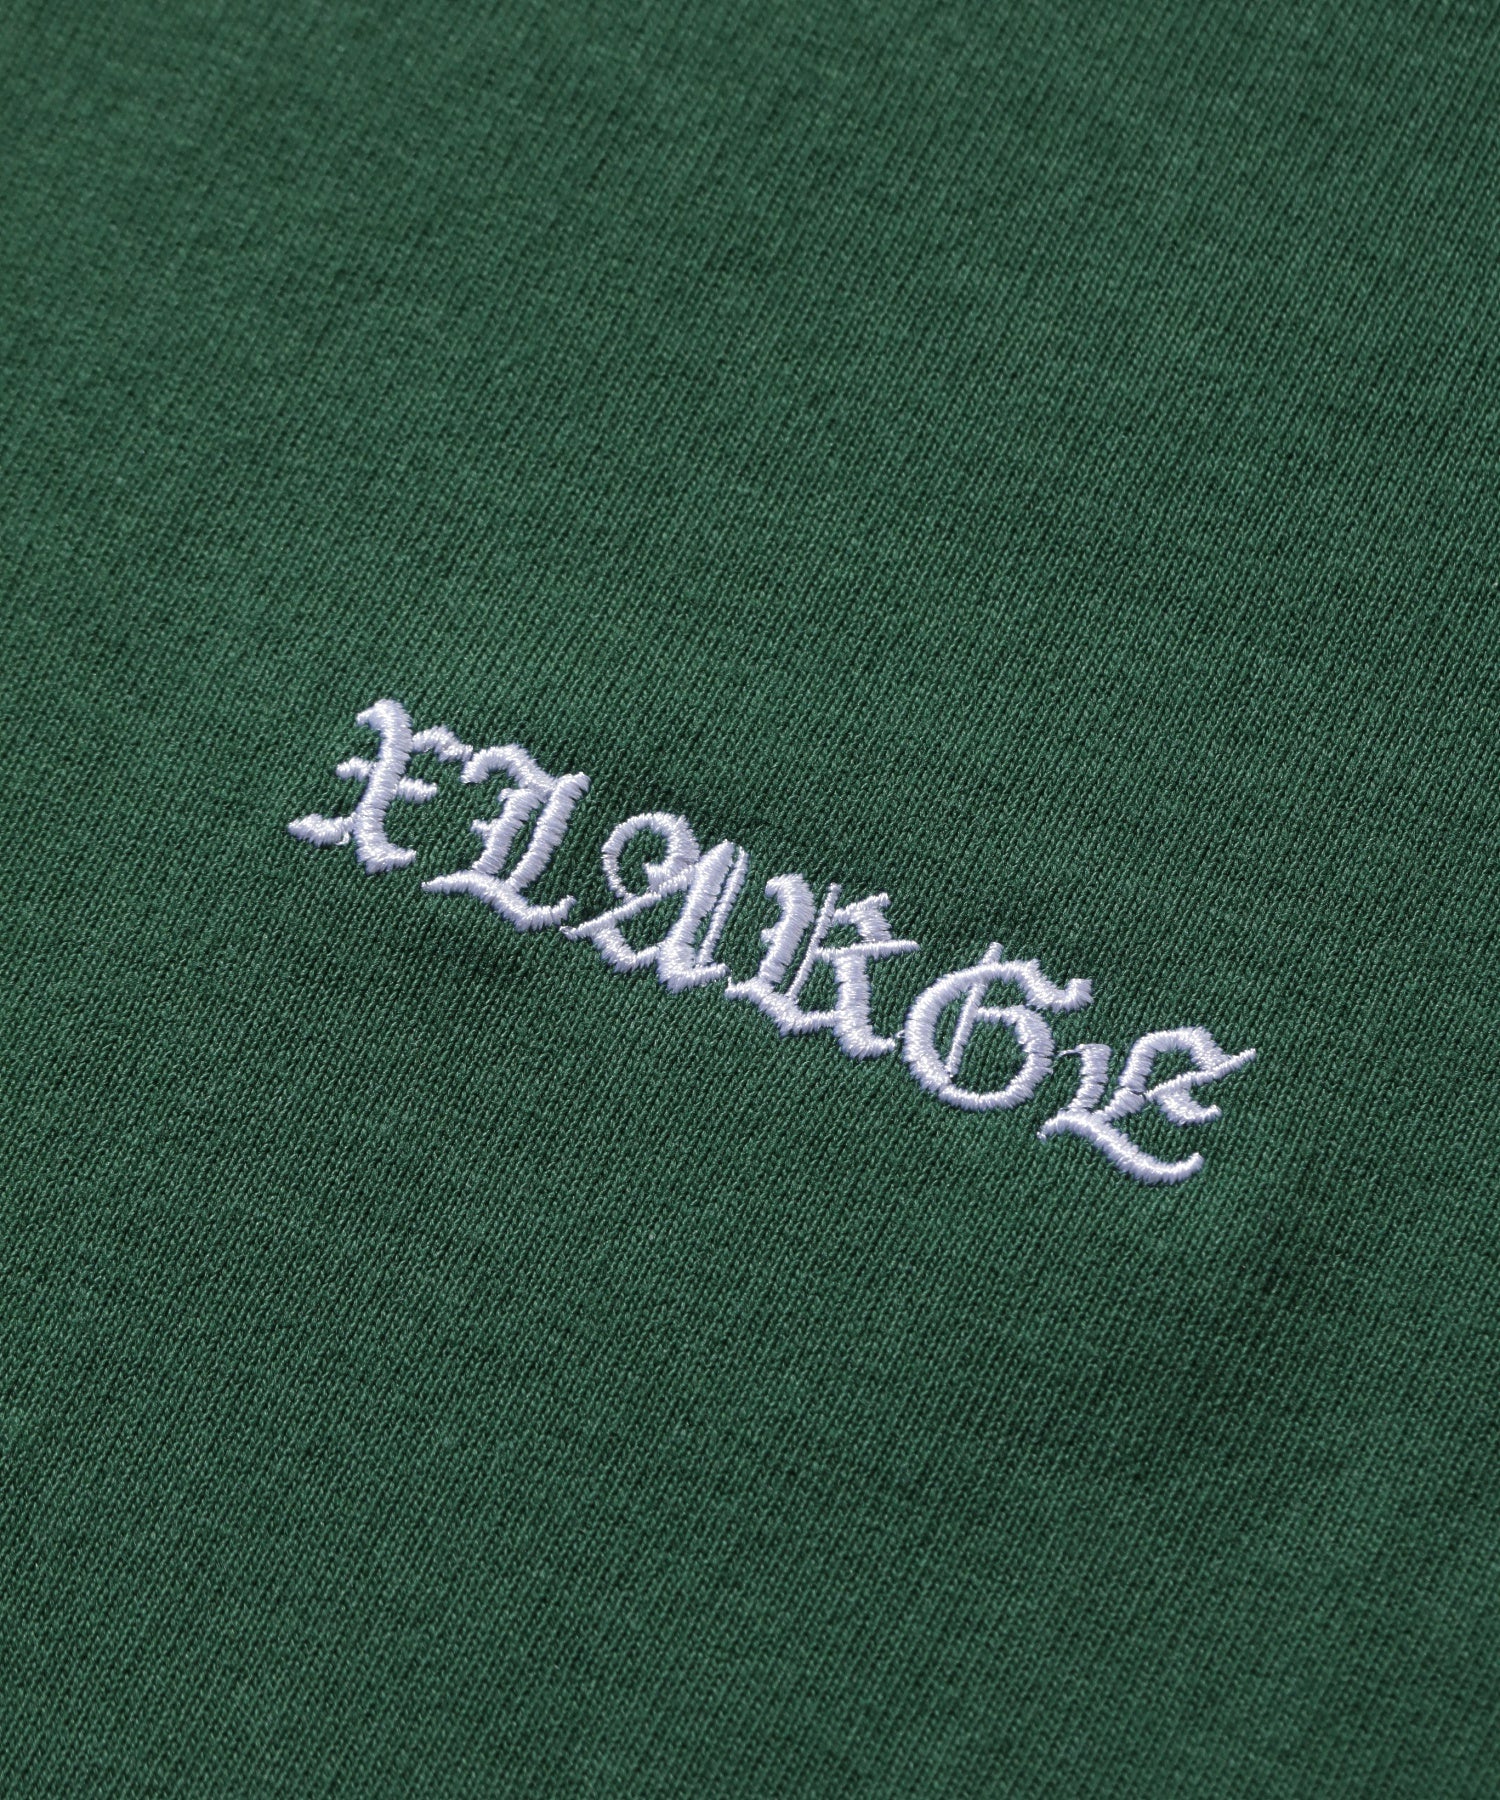 EMBROIDERED OLD ENGLISH S/S TEE